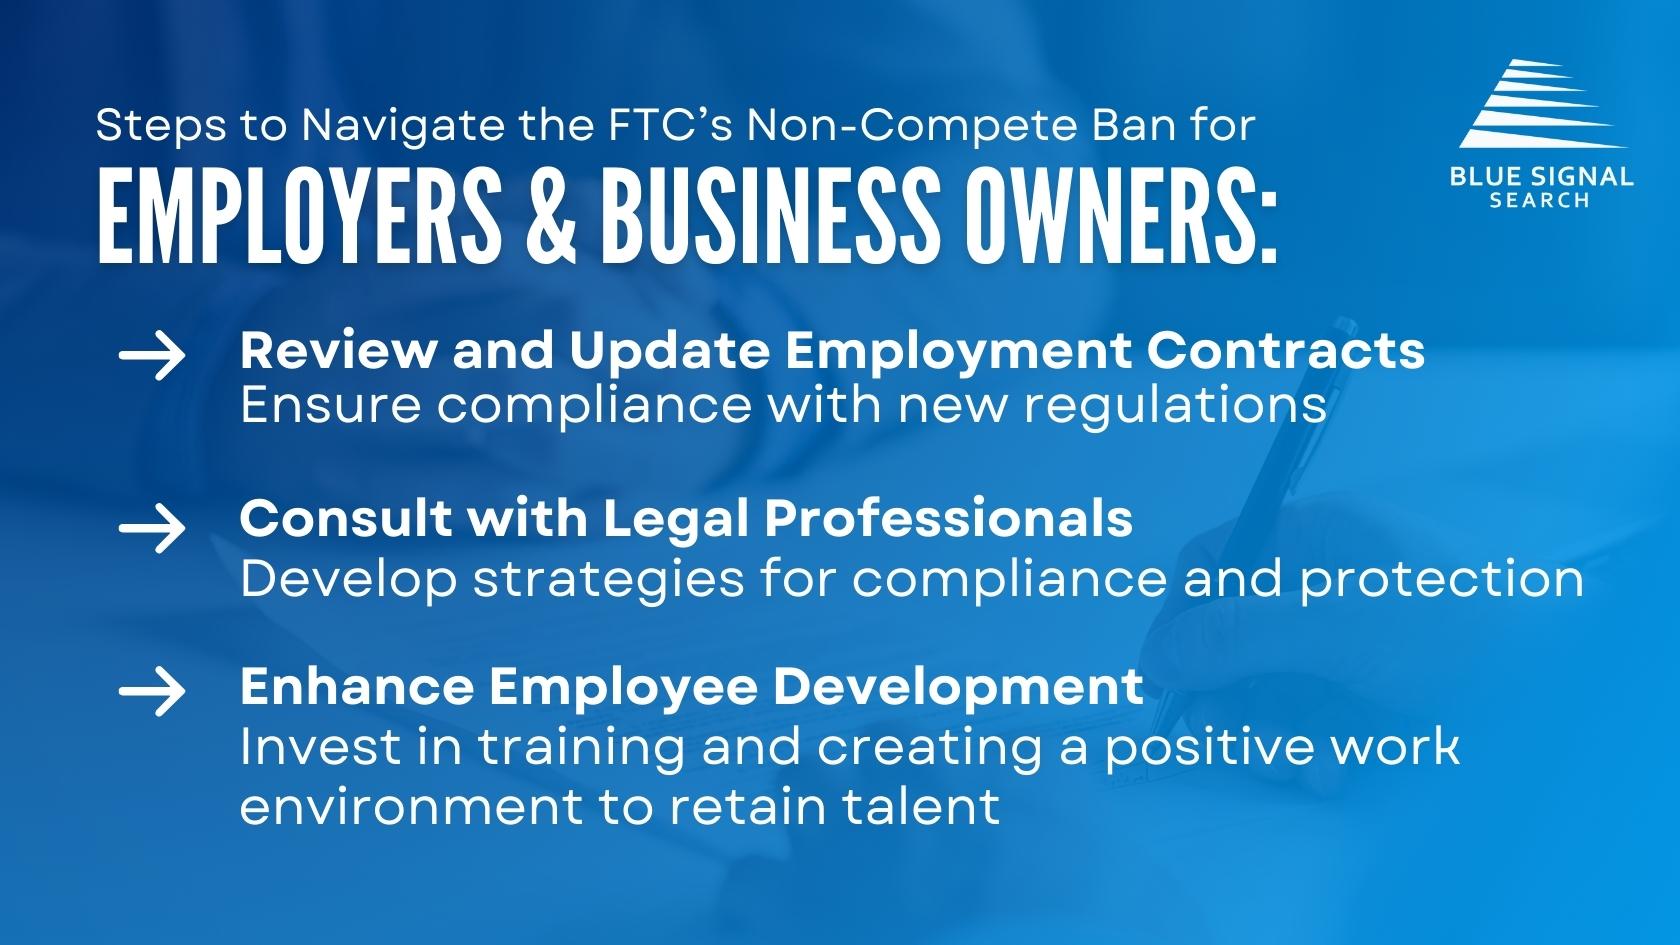 Steps for Employers to Navigate the FTC’s Non-Compete Ban